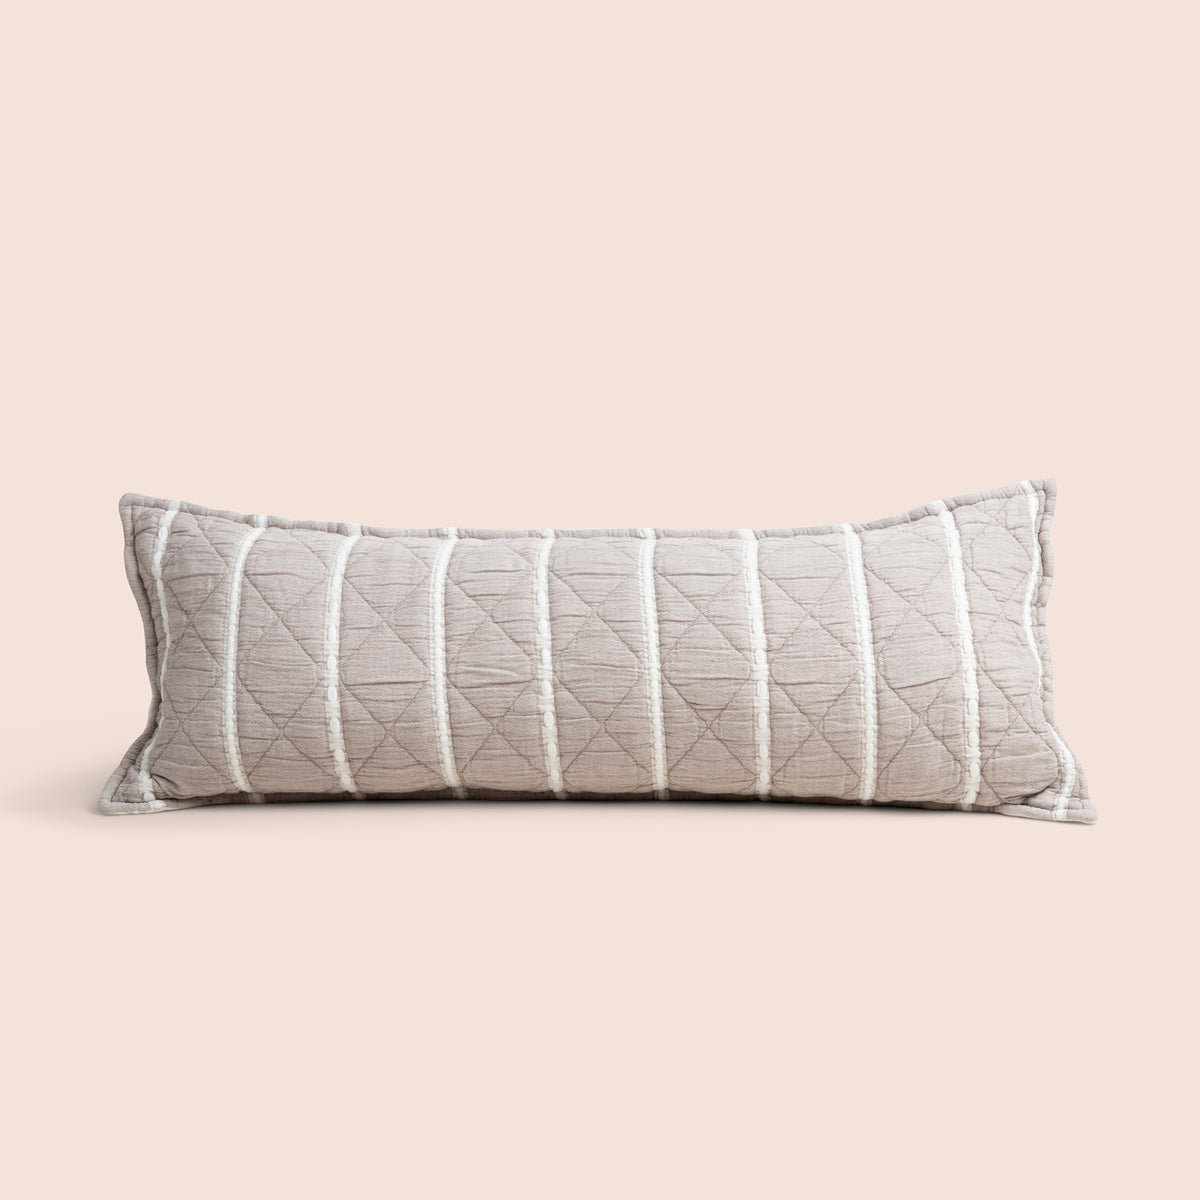 Image of the gray and white striped reversible side of the Heritage Lumbar Pillow Cover on a lumbar pillow with a light pink background